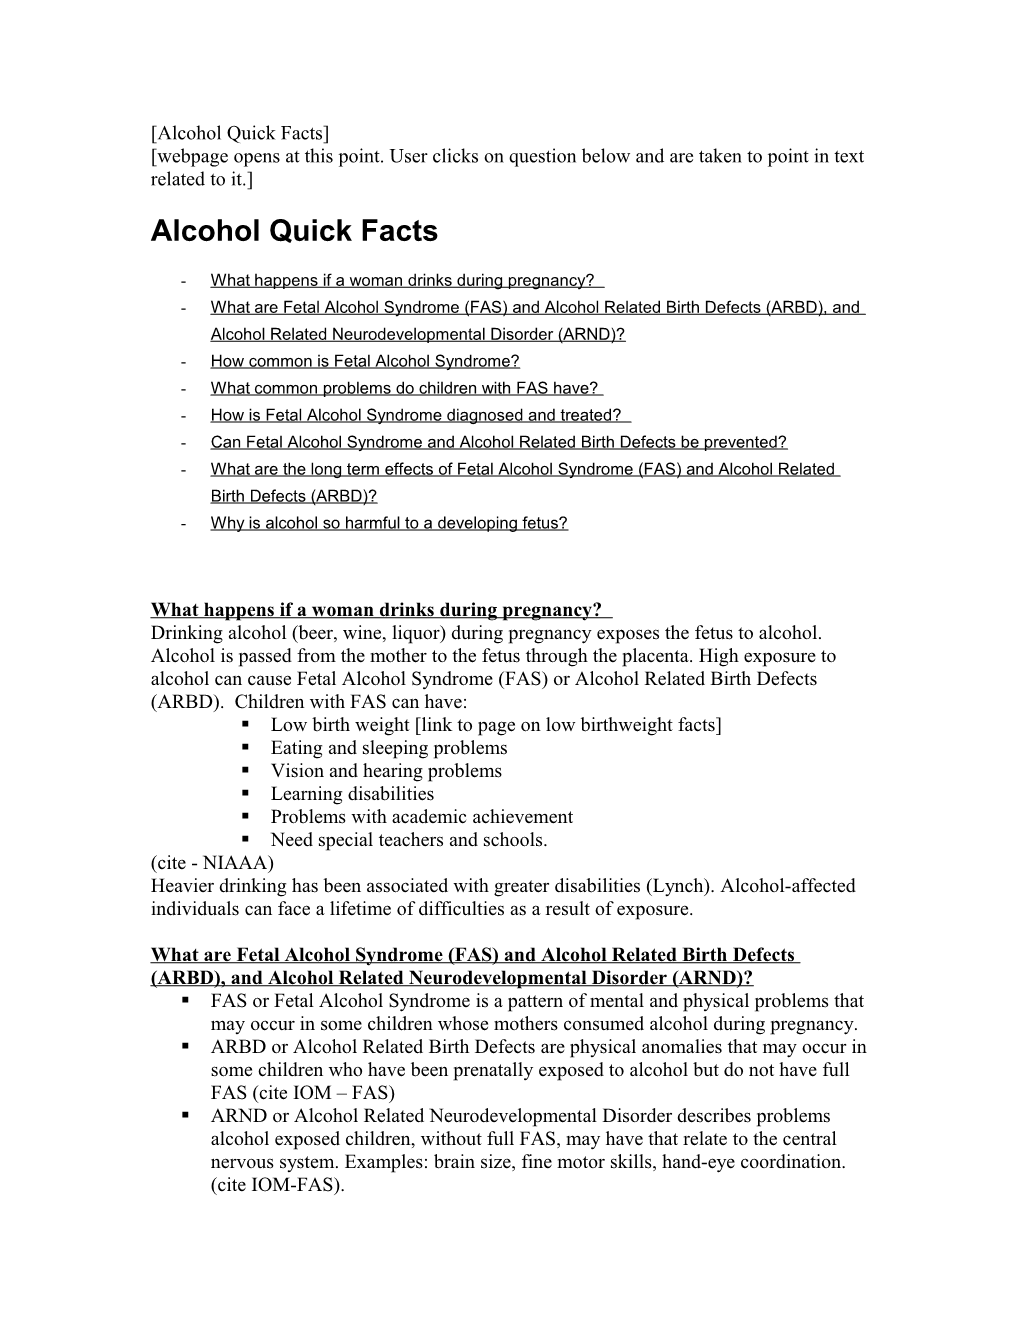 Alcohol Quick Facts